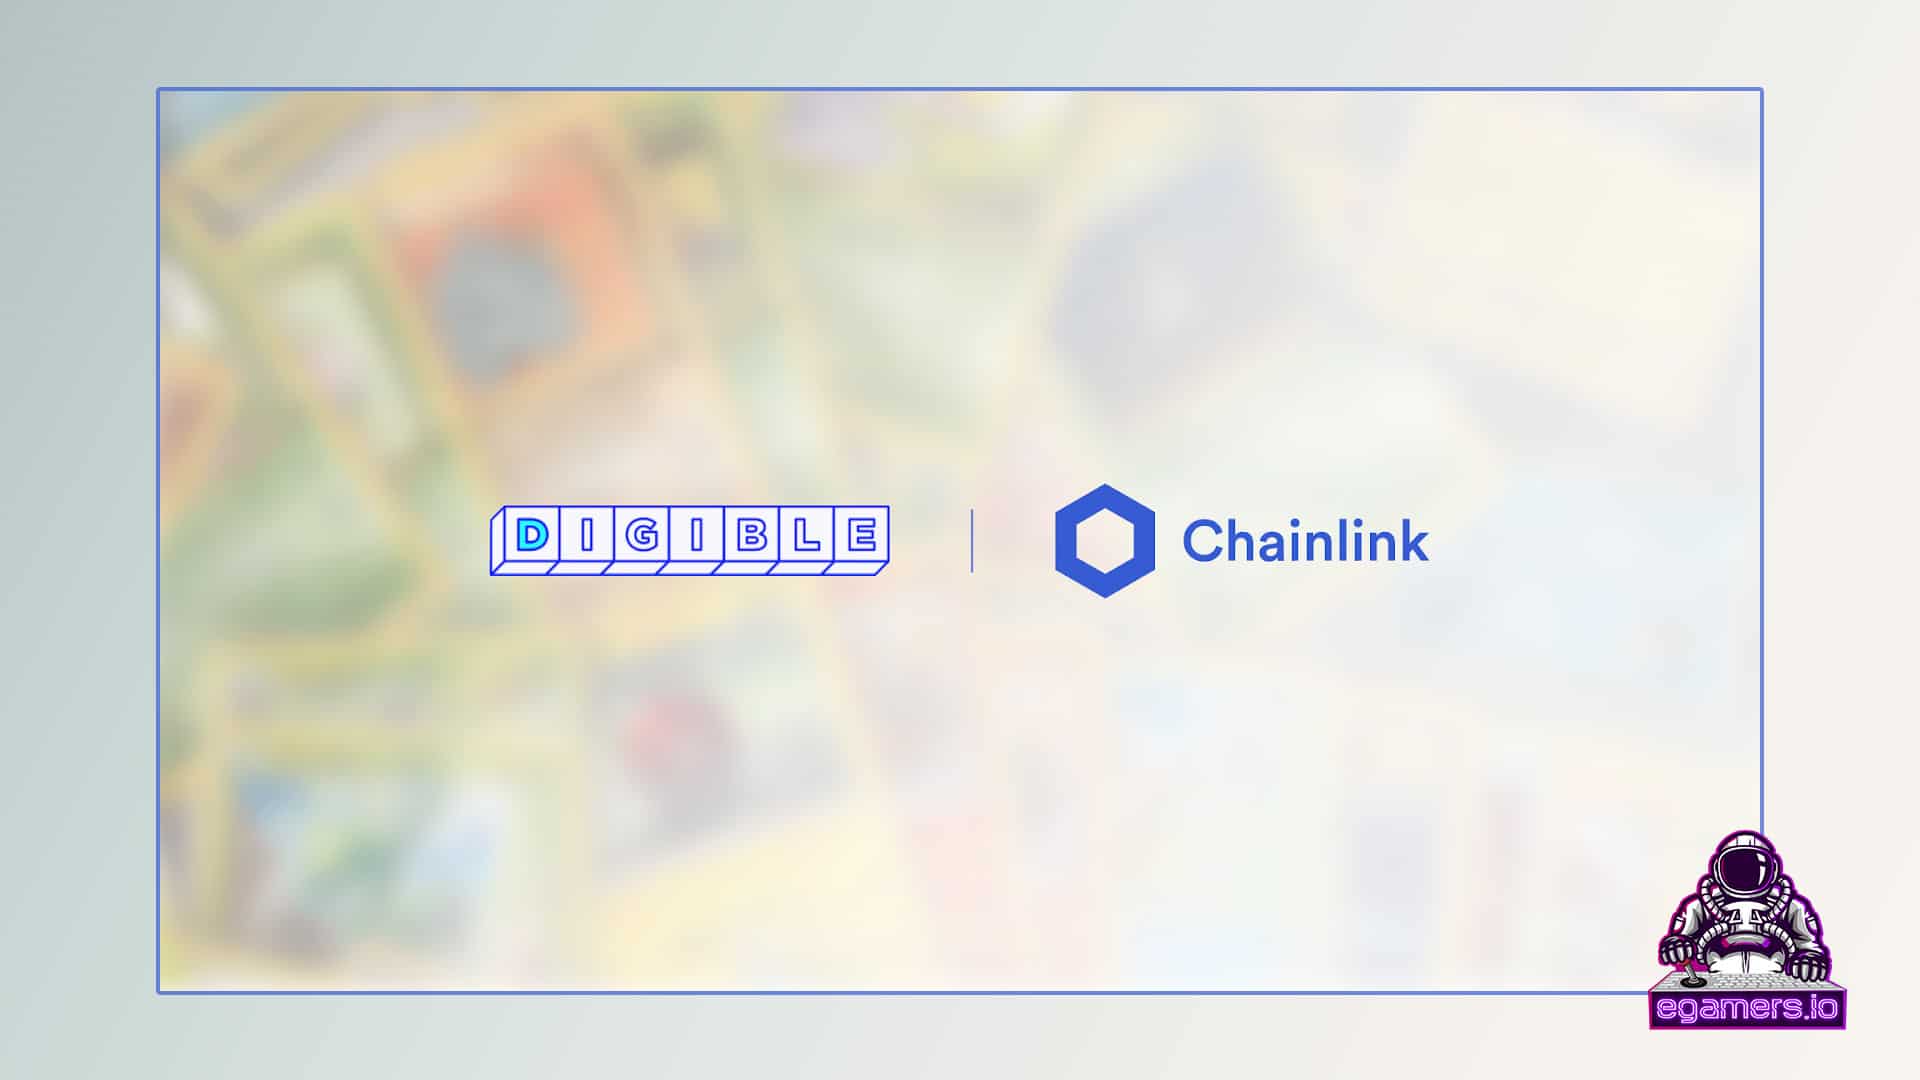 Digible To Use Chainlink’s VRF For Digiwax™ Protocol And Upcoming Pokémon Card Drop